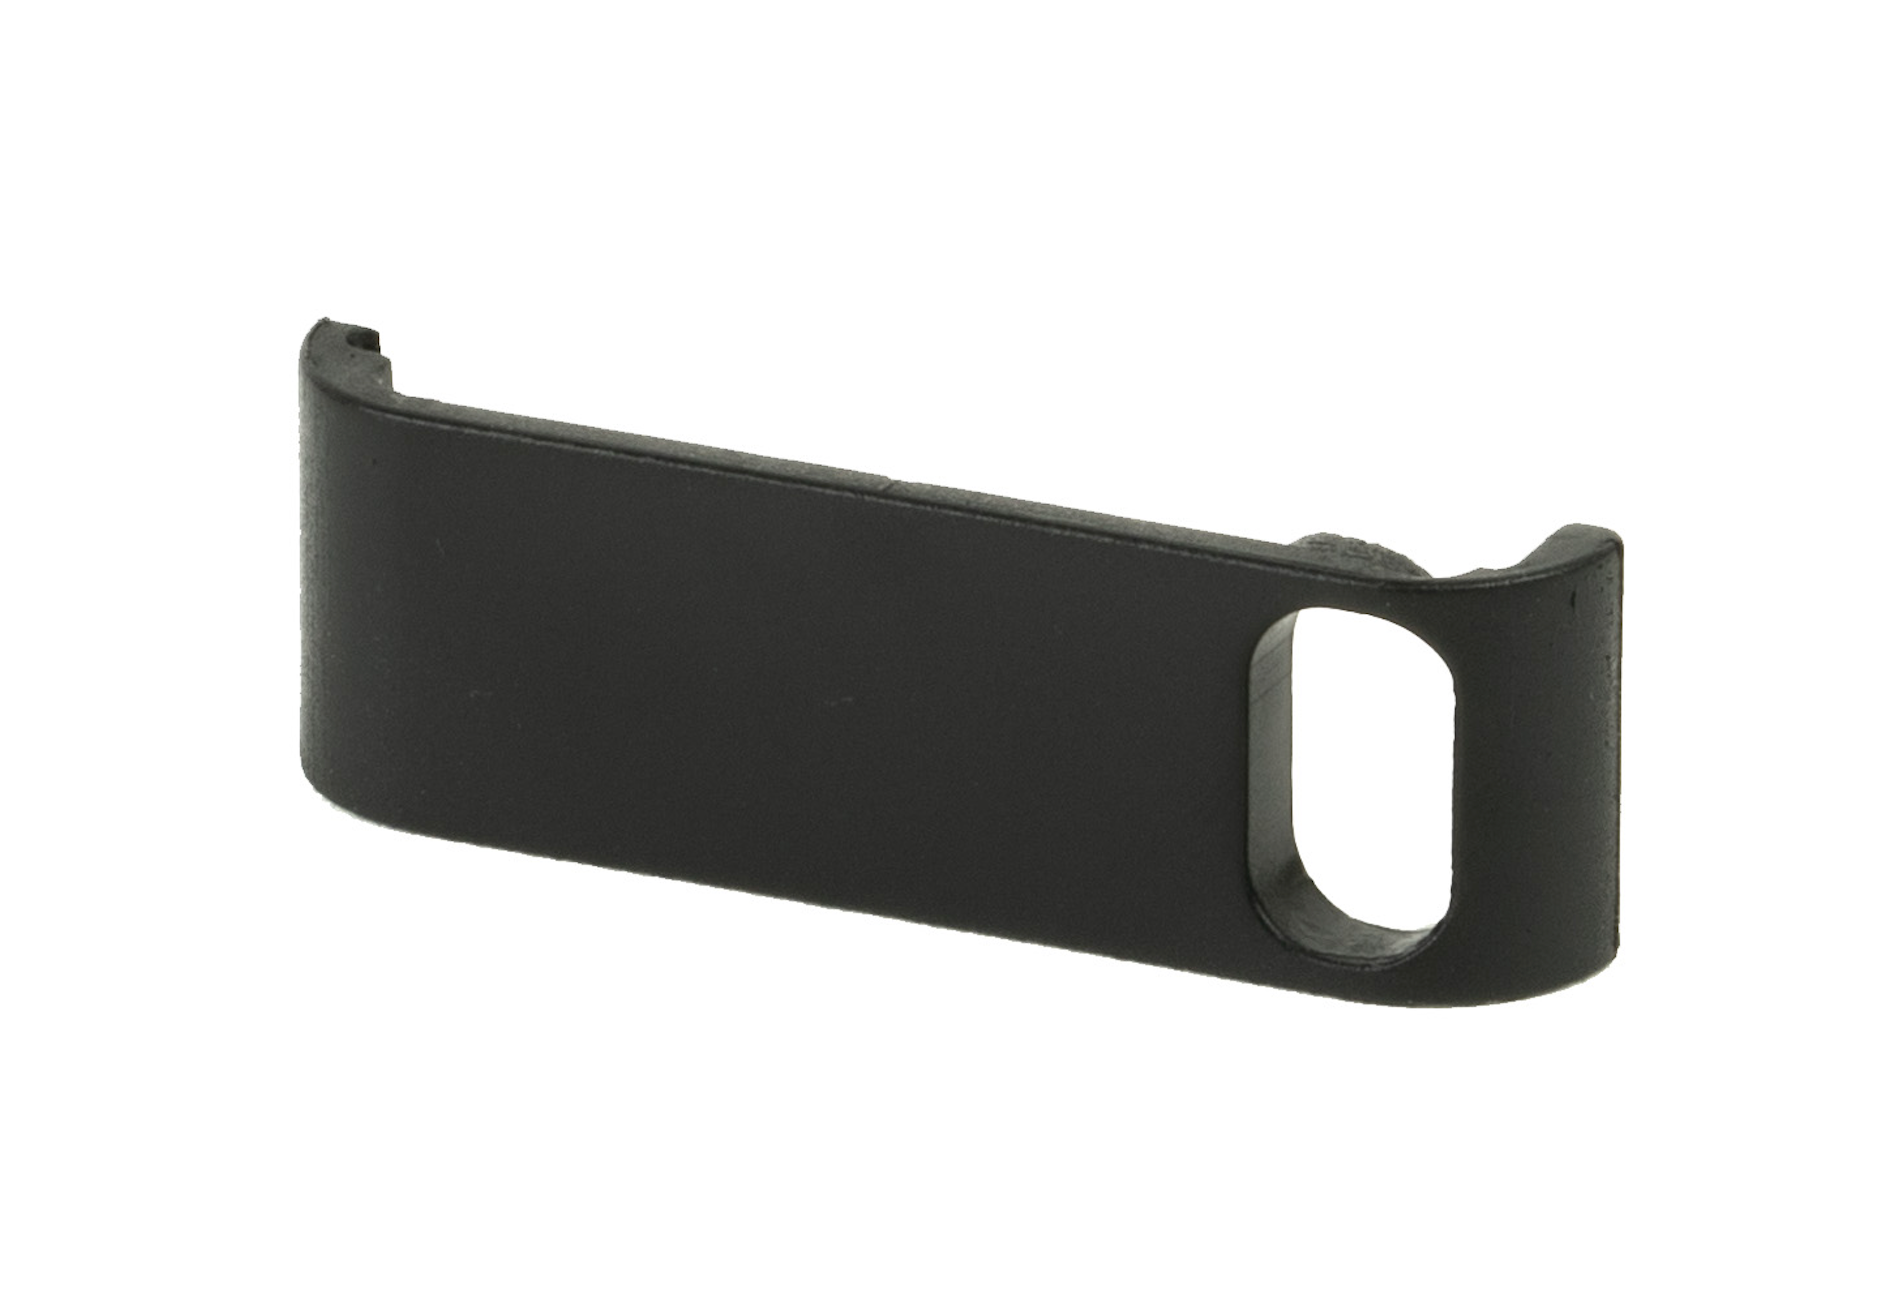 Battery Door for Use with Audio Cable and GoPro Hero8, 9, 10, 11, or 12